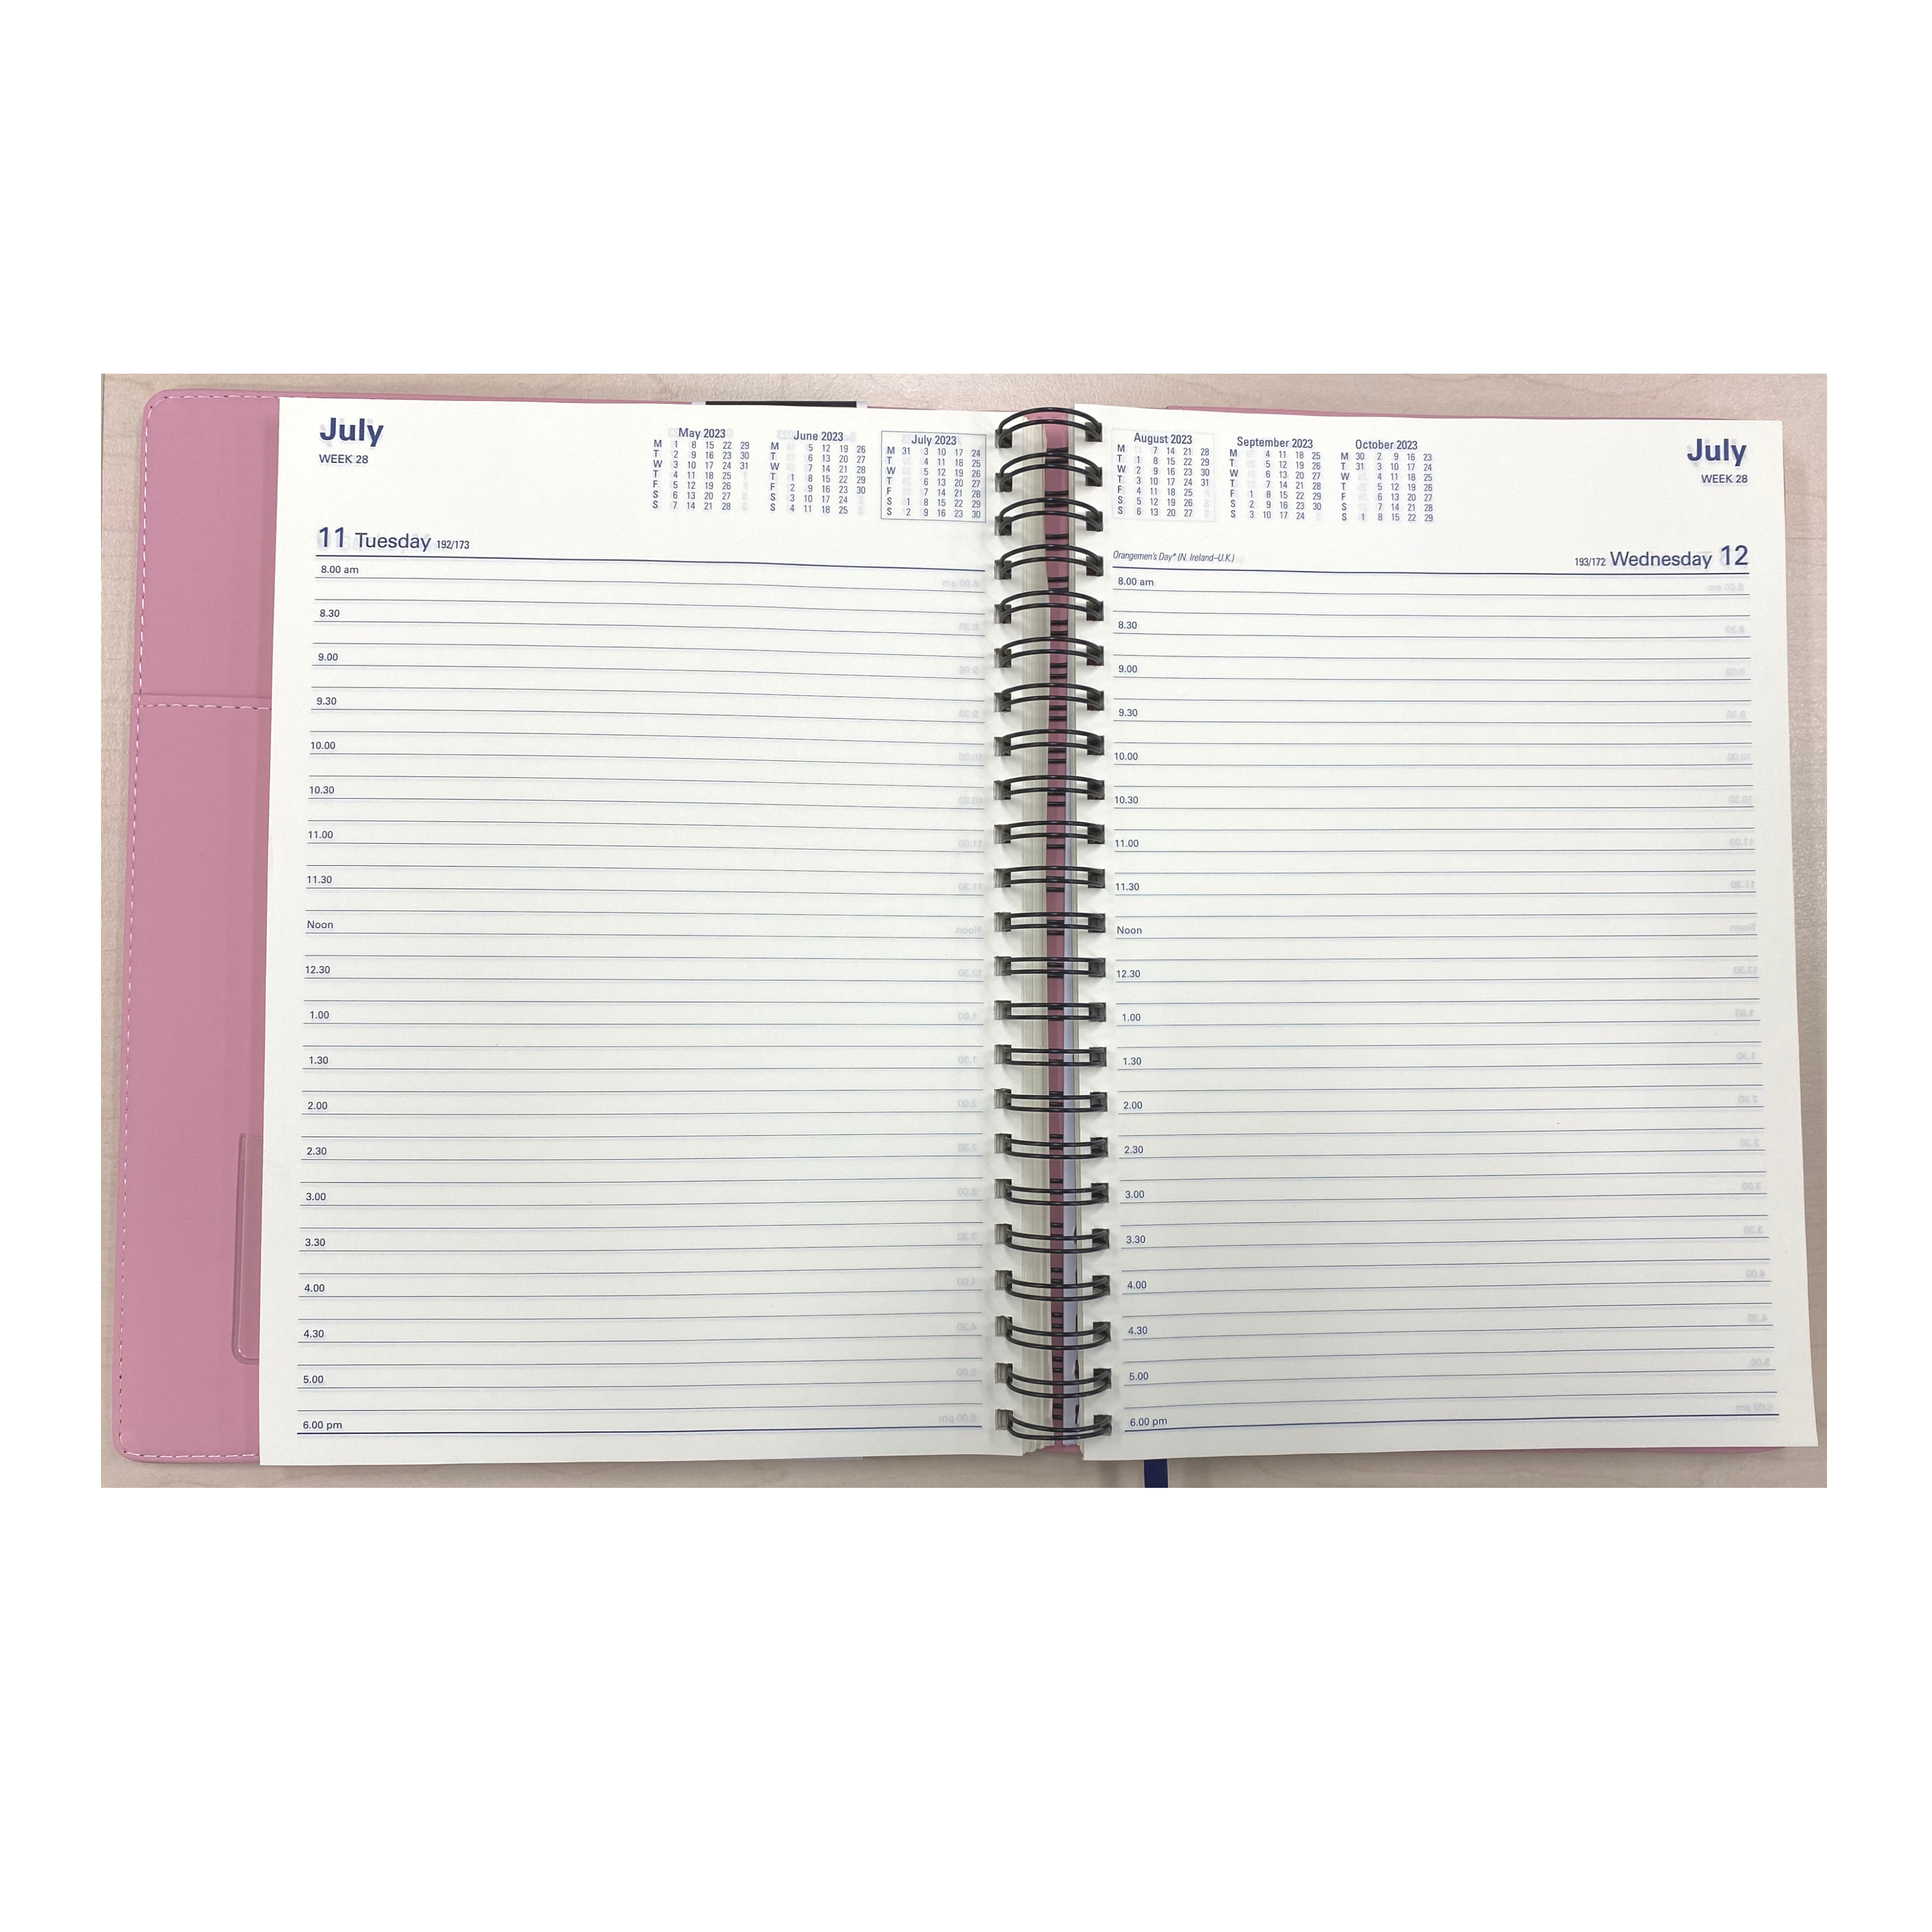 Associate II 2024 Diary - Day to Page, Size A4, 8am to 6pm, 1/2 hourly